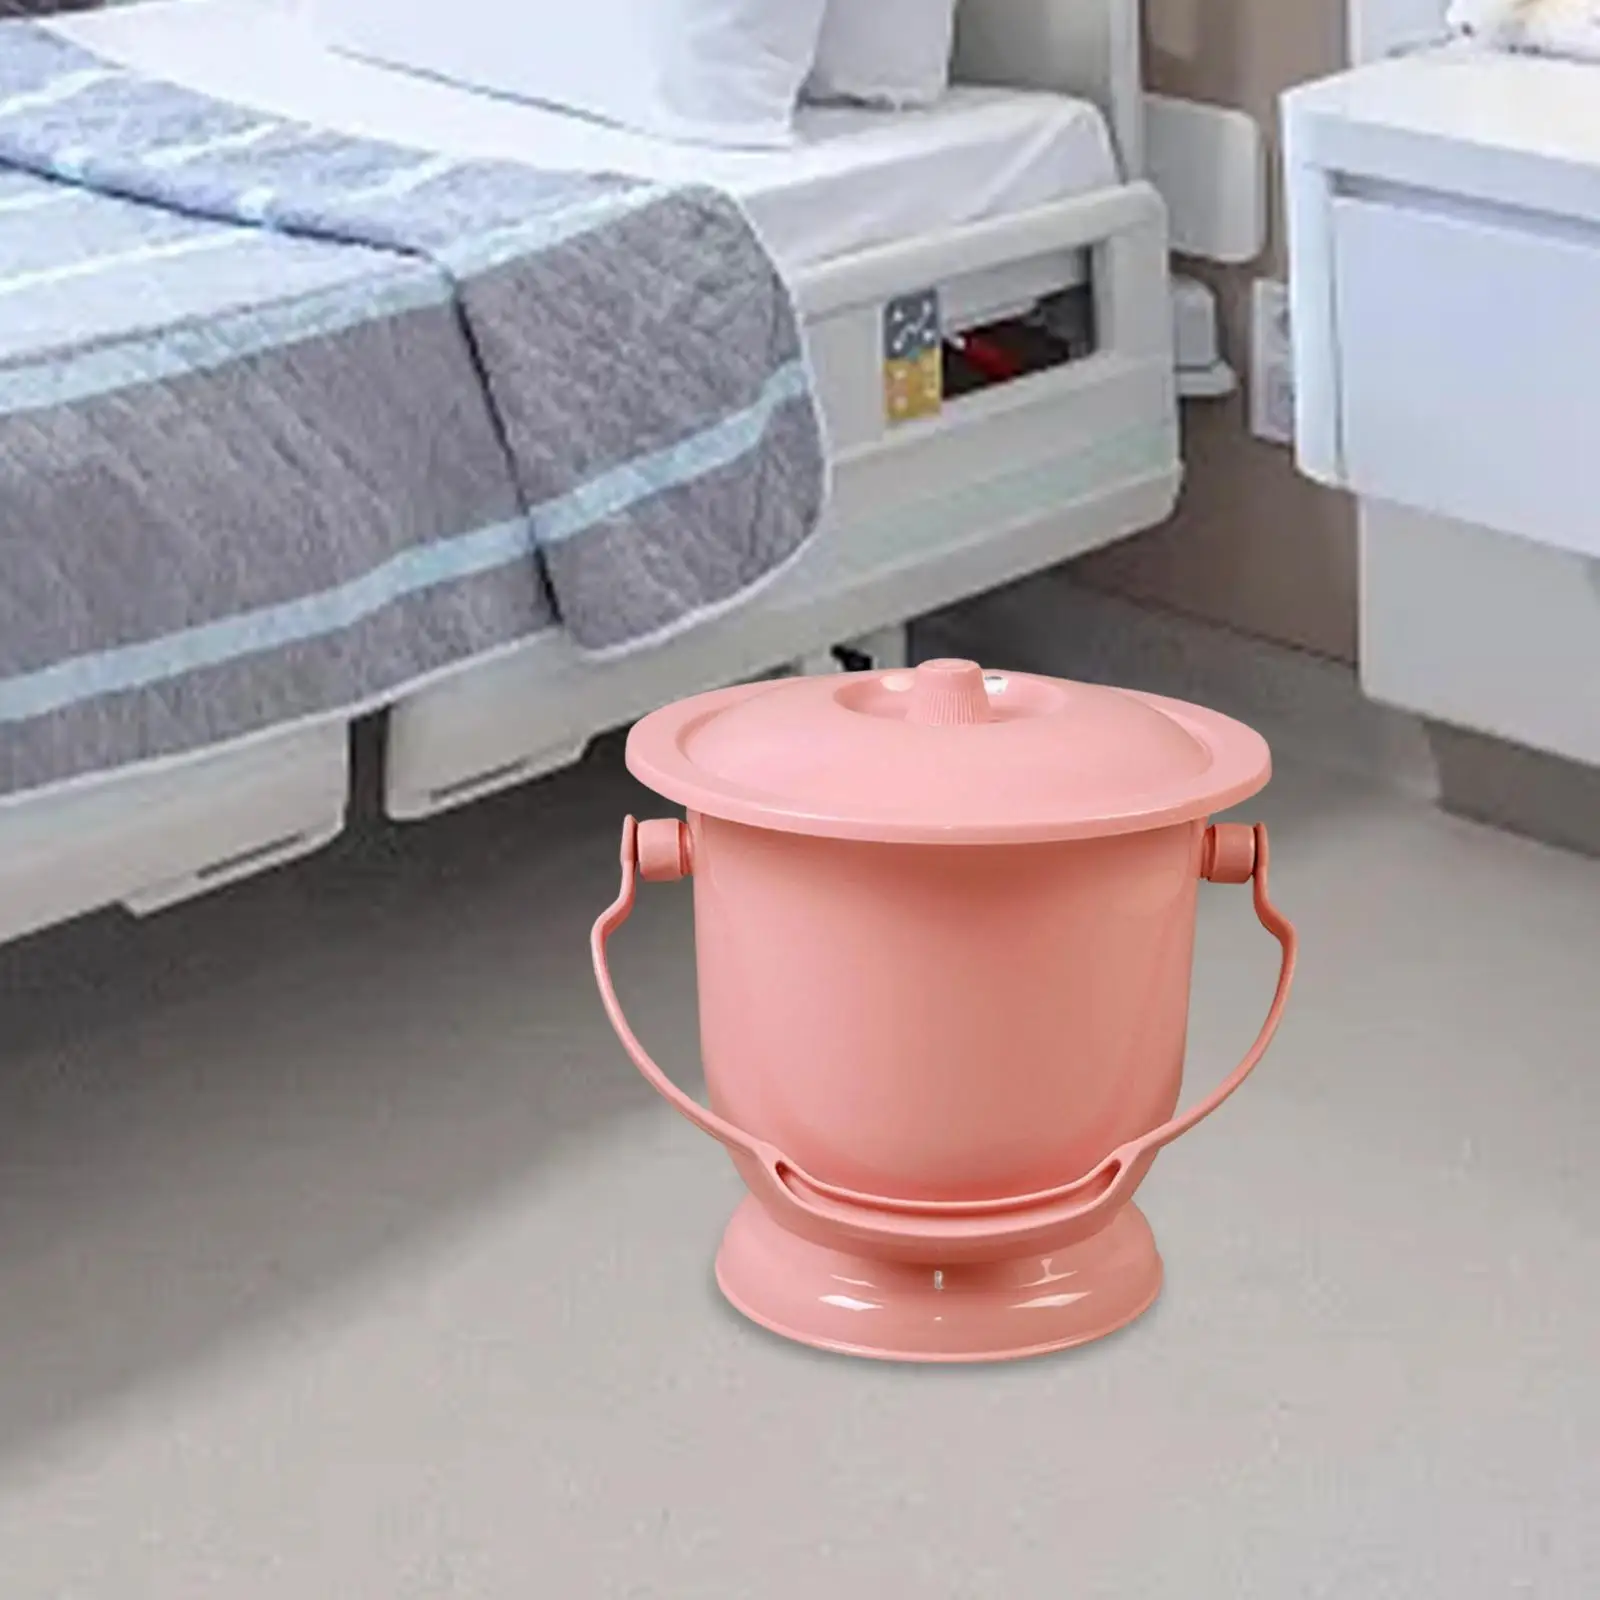 Chamber Pot with Lid Spittoon Bedpan Children Adults Practical Urine Pot